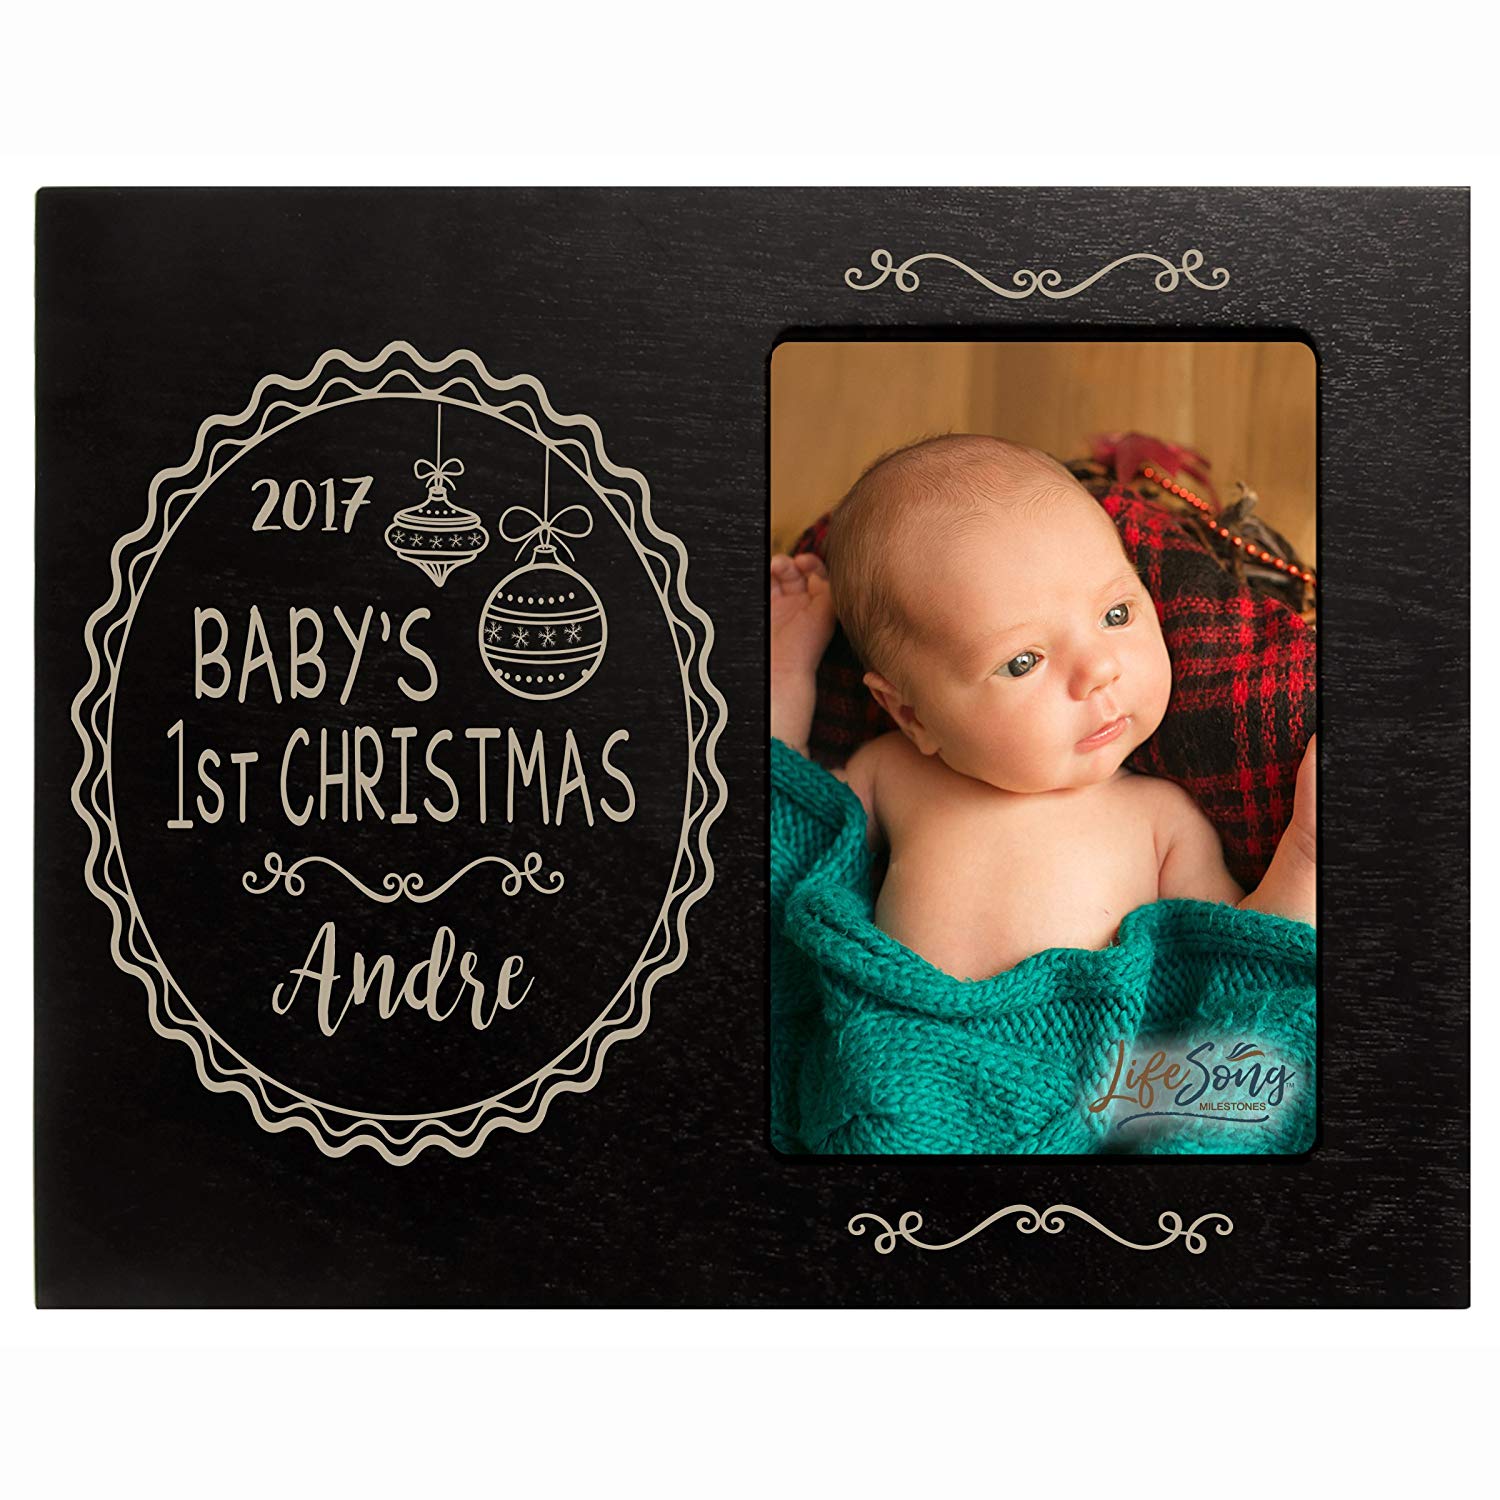 Personalized Home Christmas Ornament Design Photo Frame Holds 4x6 Photograph - LifeSong Milestones